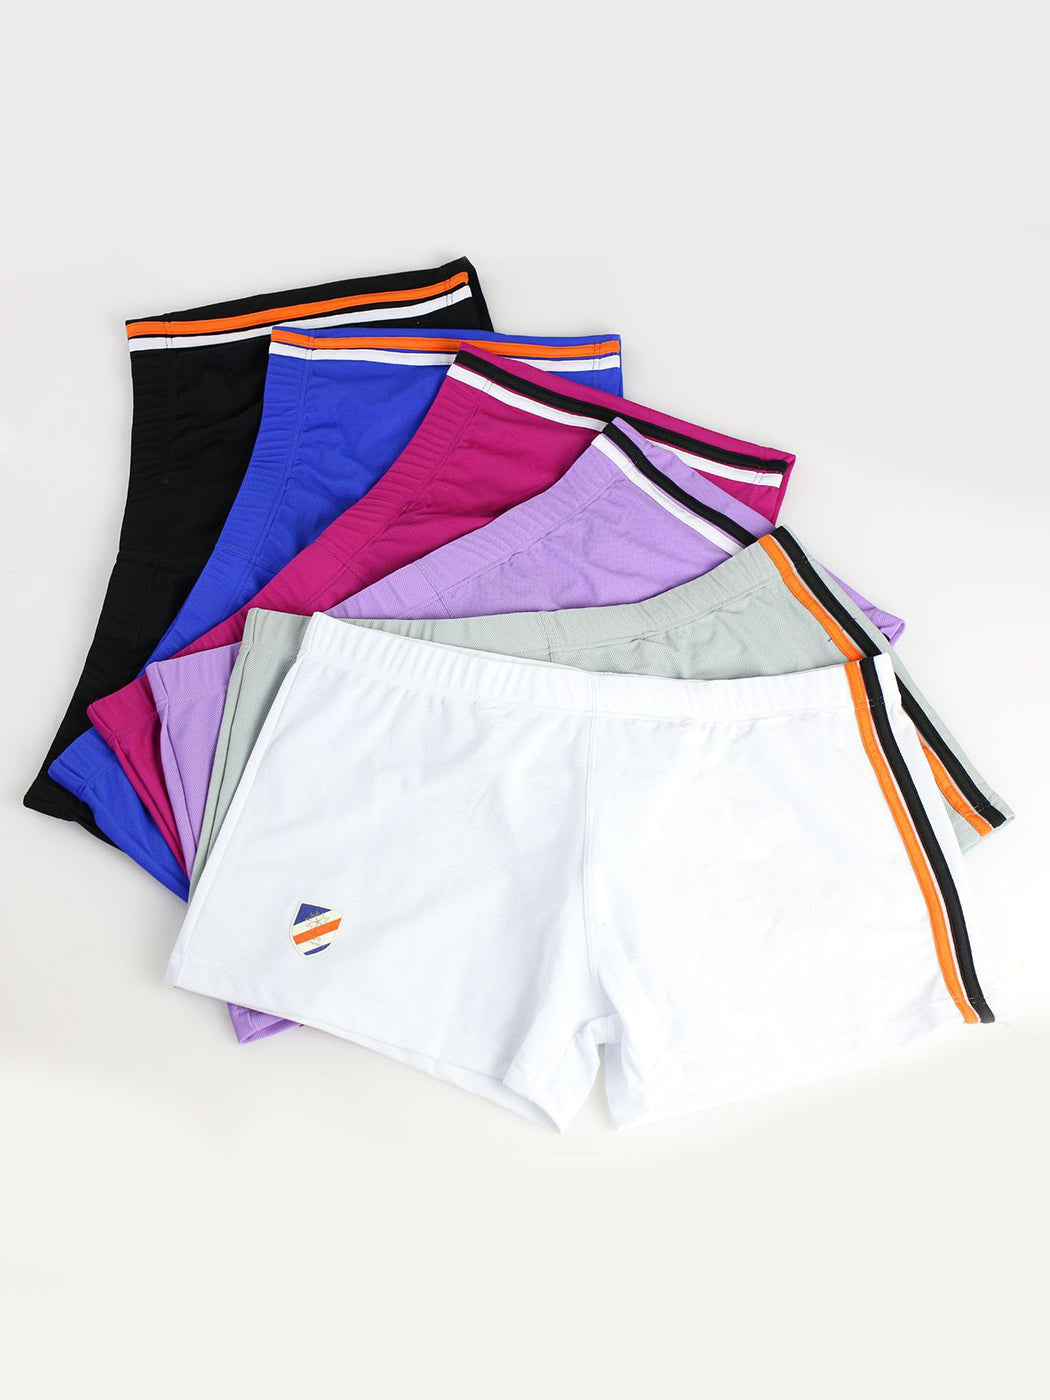 Men’s Shorts With Separate Pockets